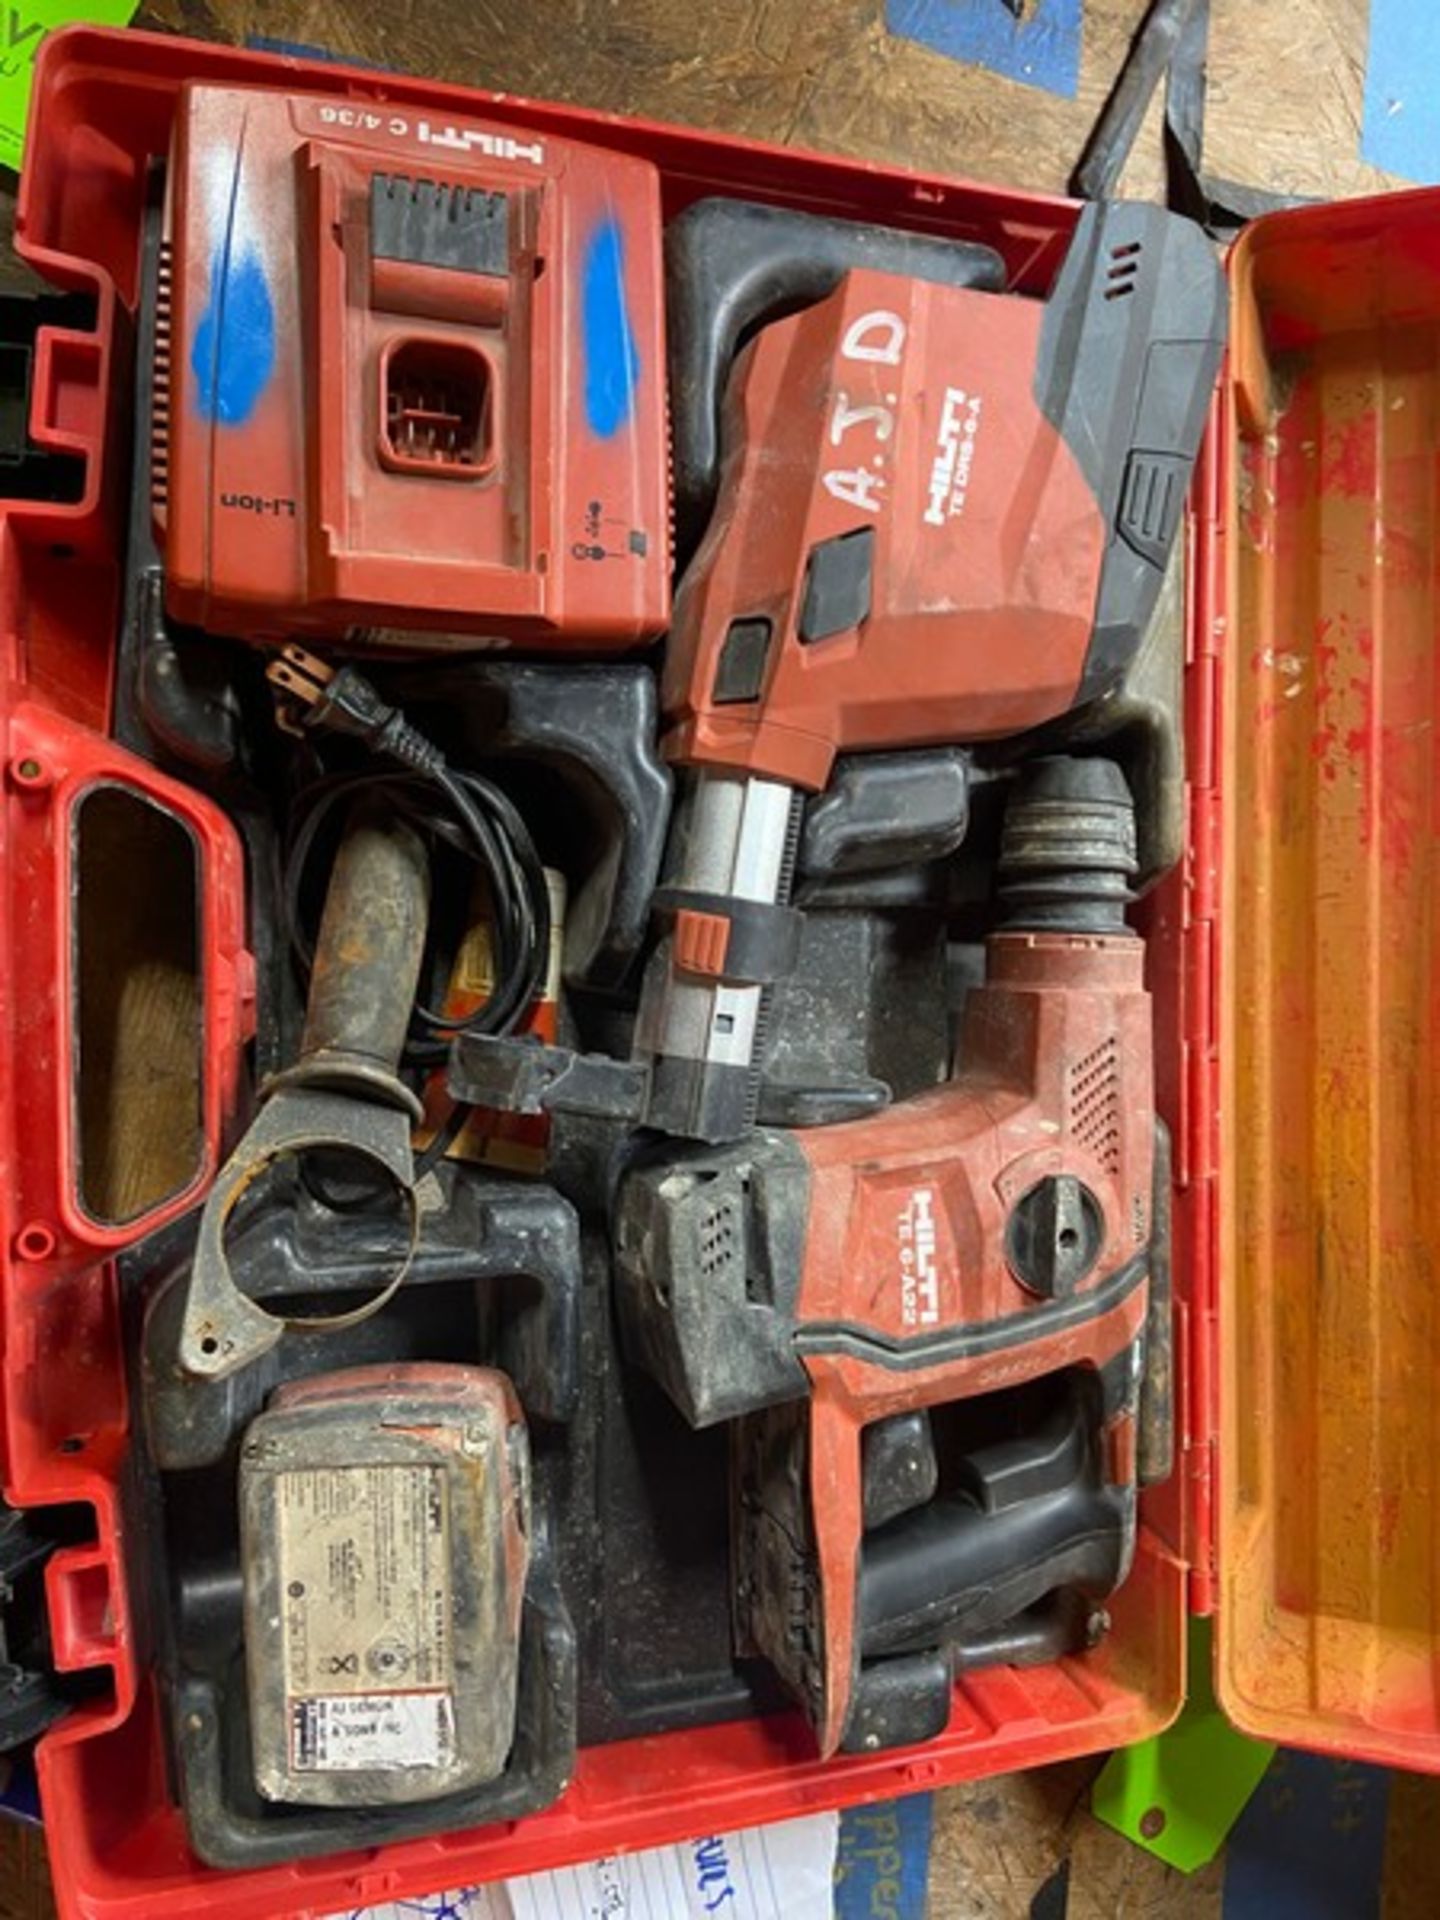 HILTI Cordless Rotary Hammer, M/N TE 6-A22, Includes Dust Removal System, M/N TETS-6-71-CA, with - Image 2 of 6